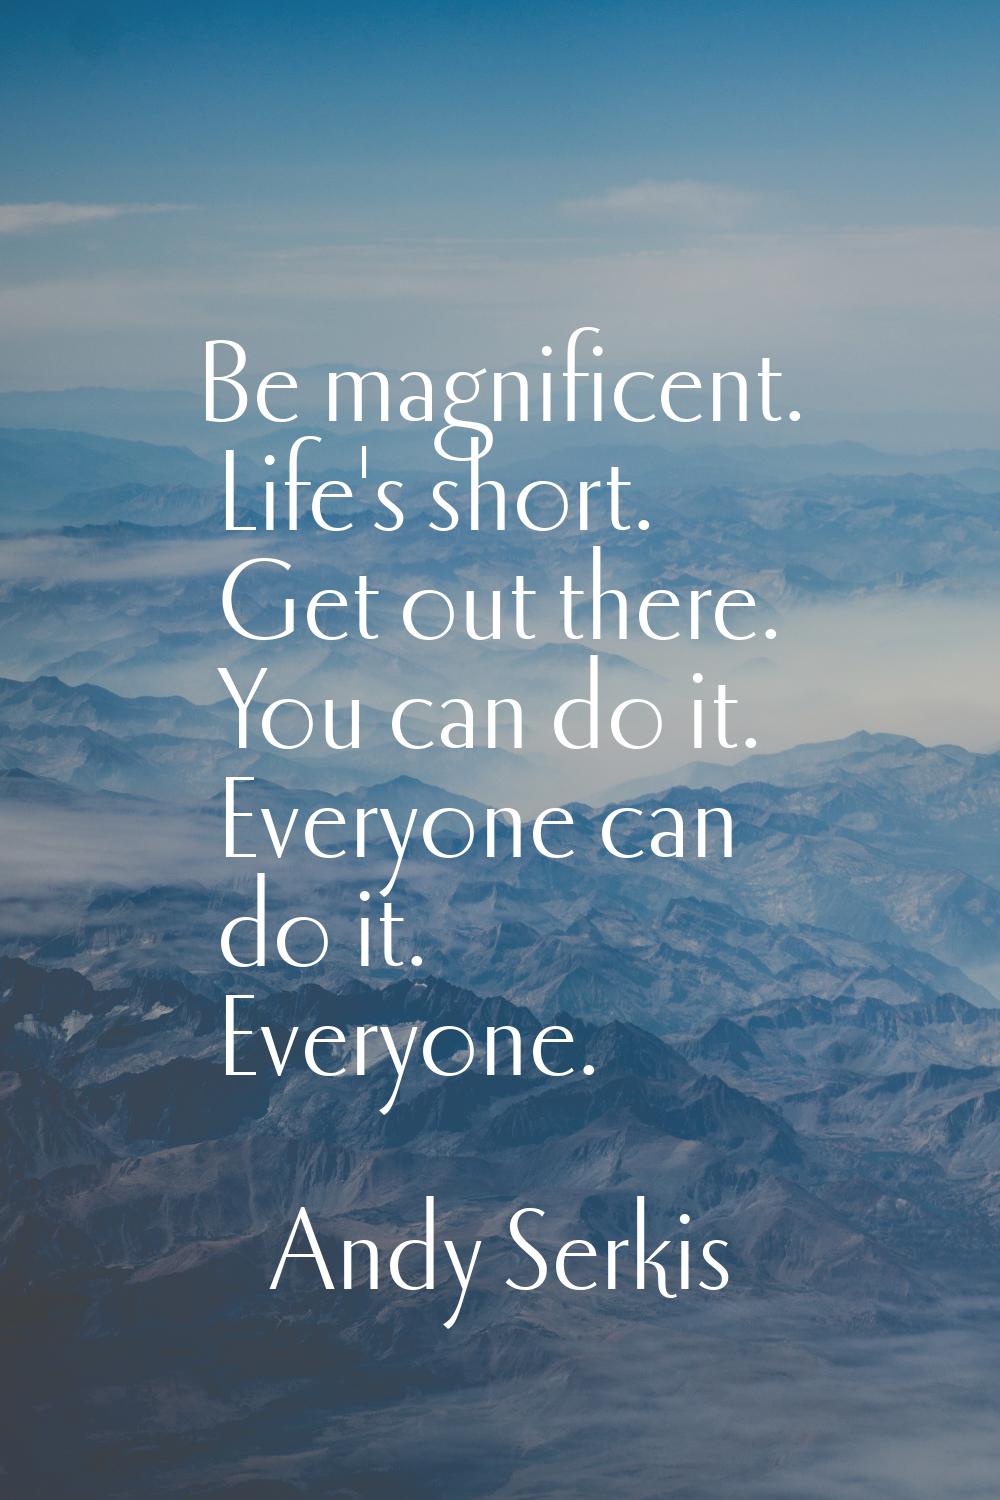 Be magnificent. Life's short. Get out there. You can do it. Everyone can do it. Everyone.